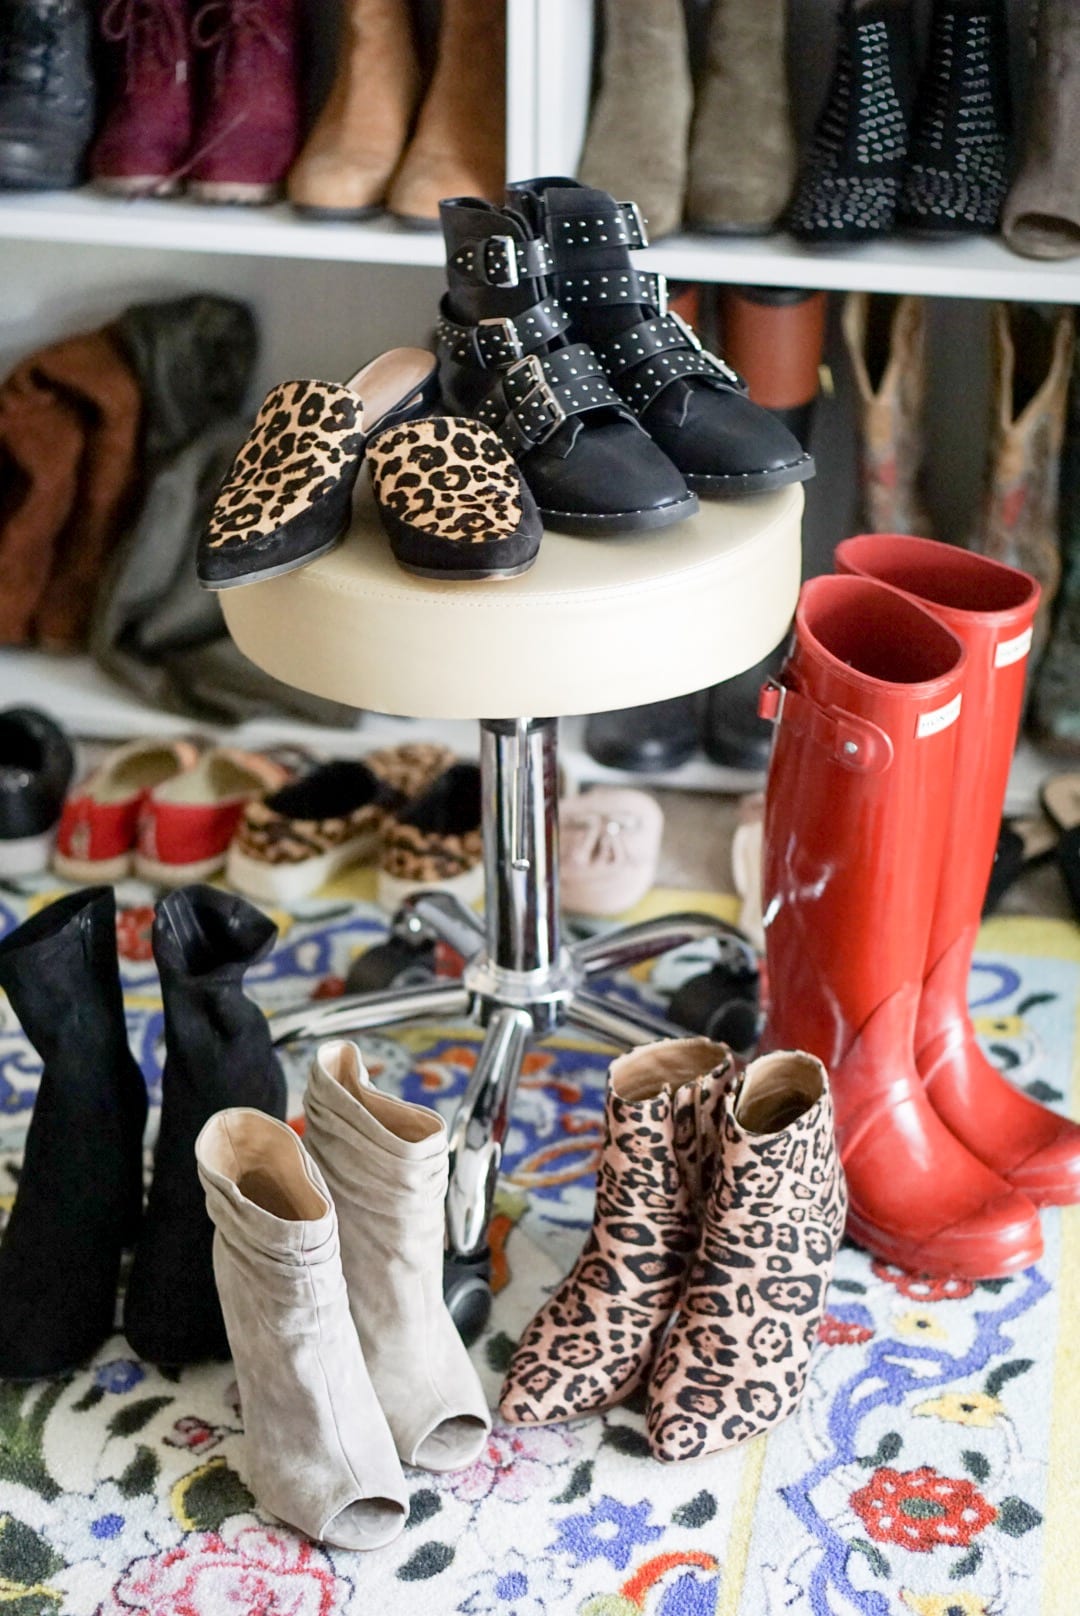 TARGET, SHOPBOB, HUNTER BOOTS, RED HUNTER BOOTS, STUDDED BOOTS, BOOTS FOR FALL, FALL SHOES, PEEP TOE BOOTS, SOCK BOOTIES, LEOPARD BOOTIES, LEOPARD MULES, LEOPARD SLIDES